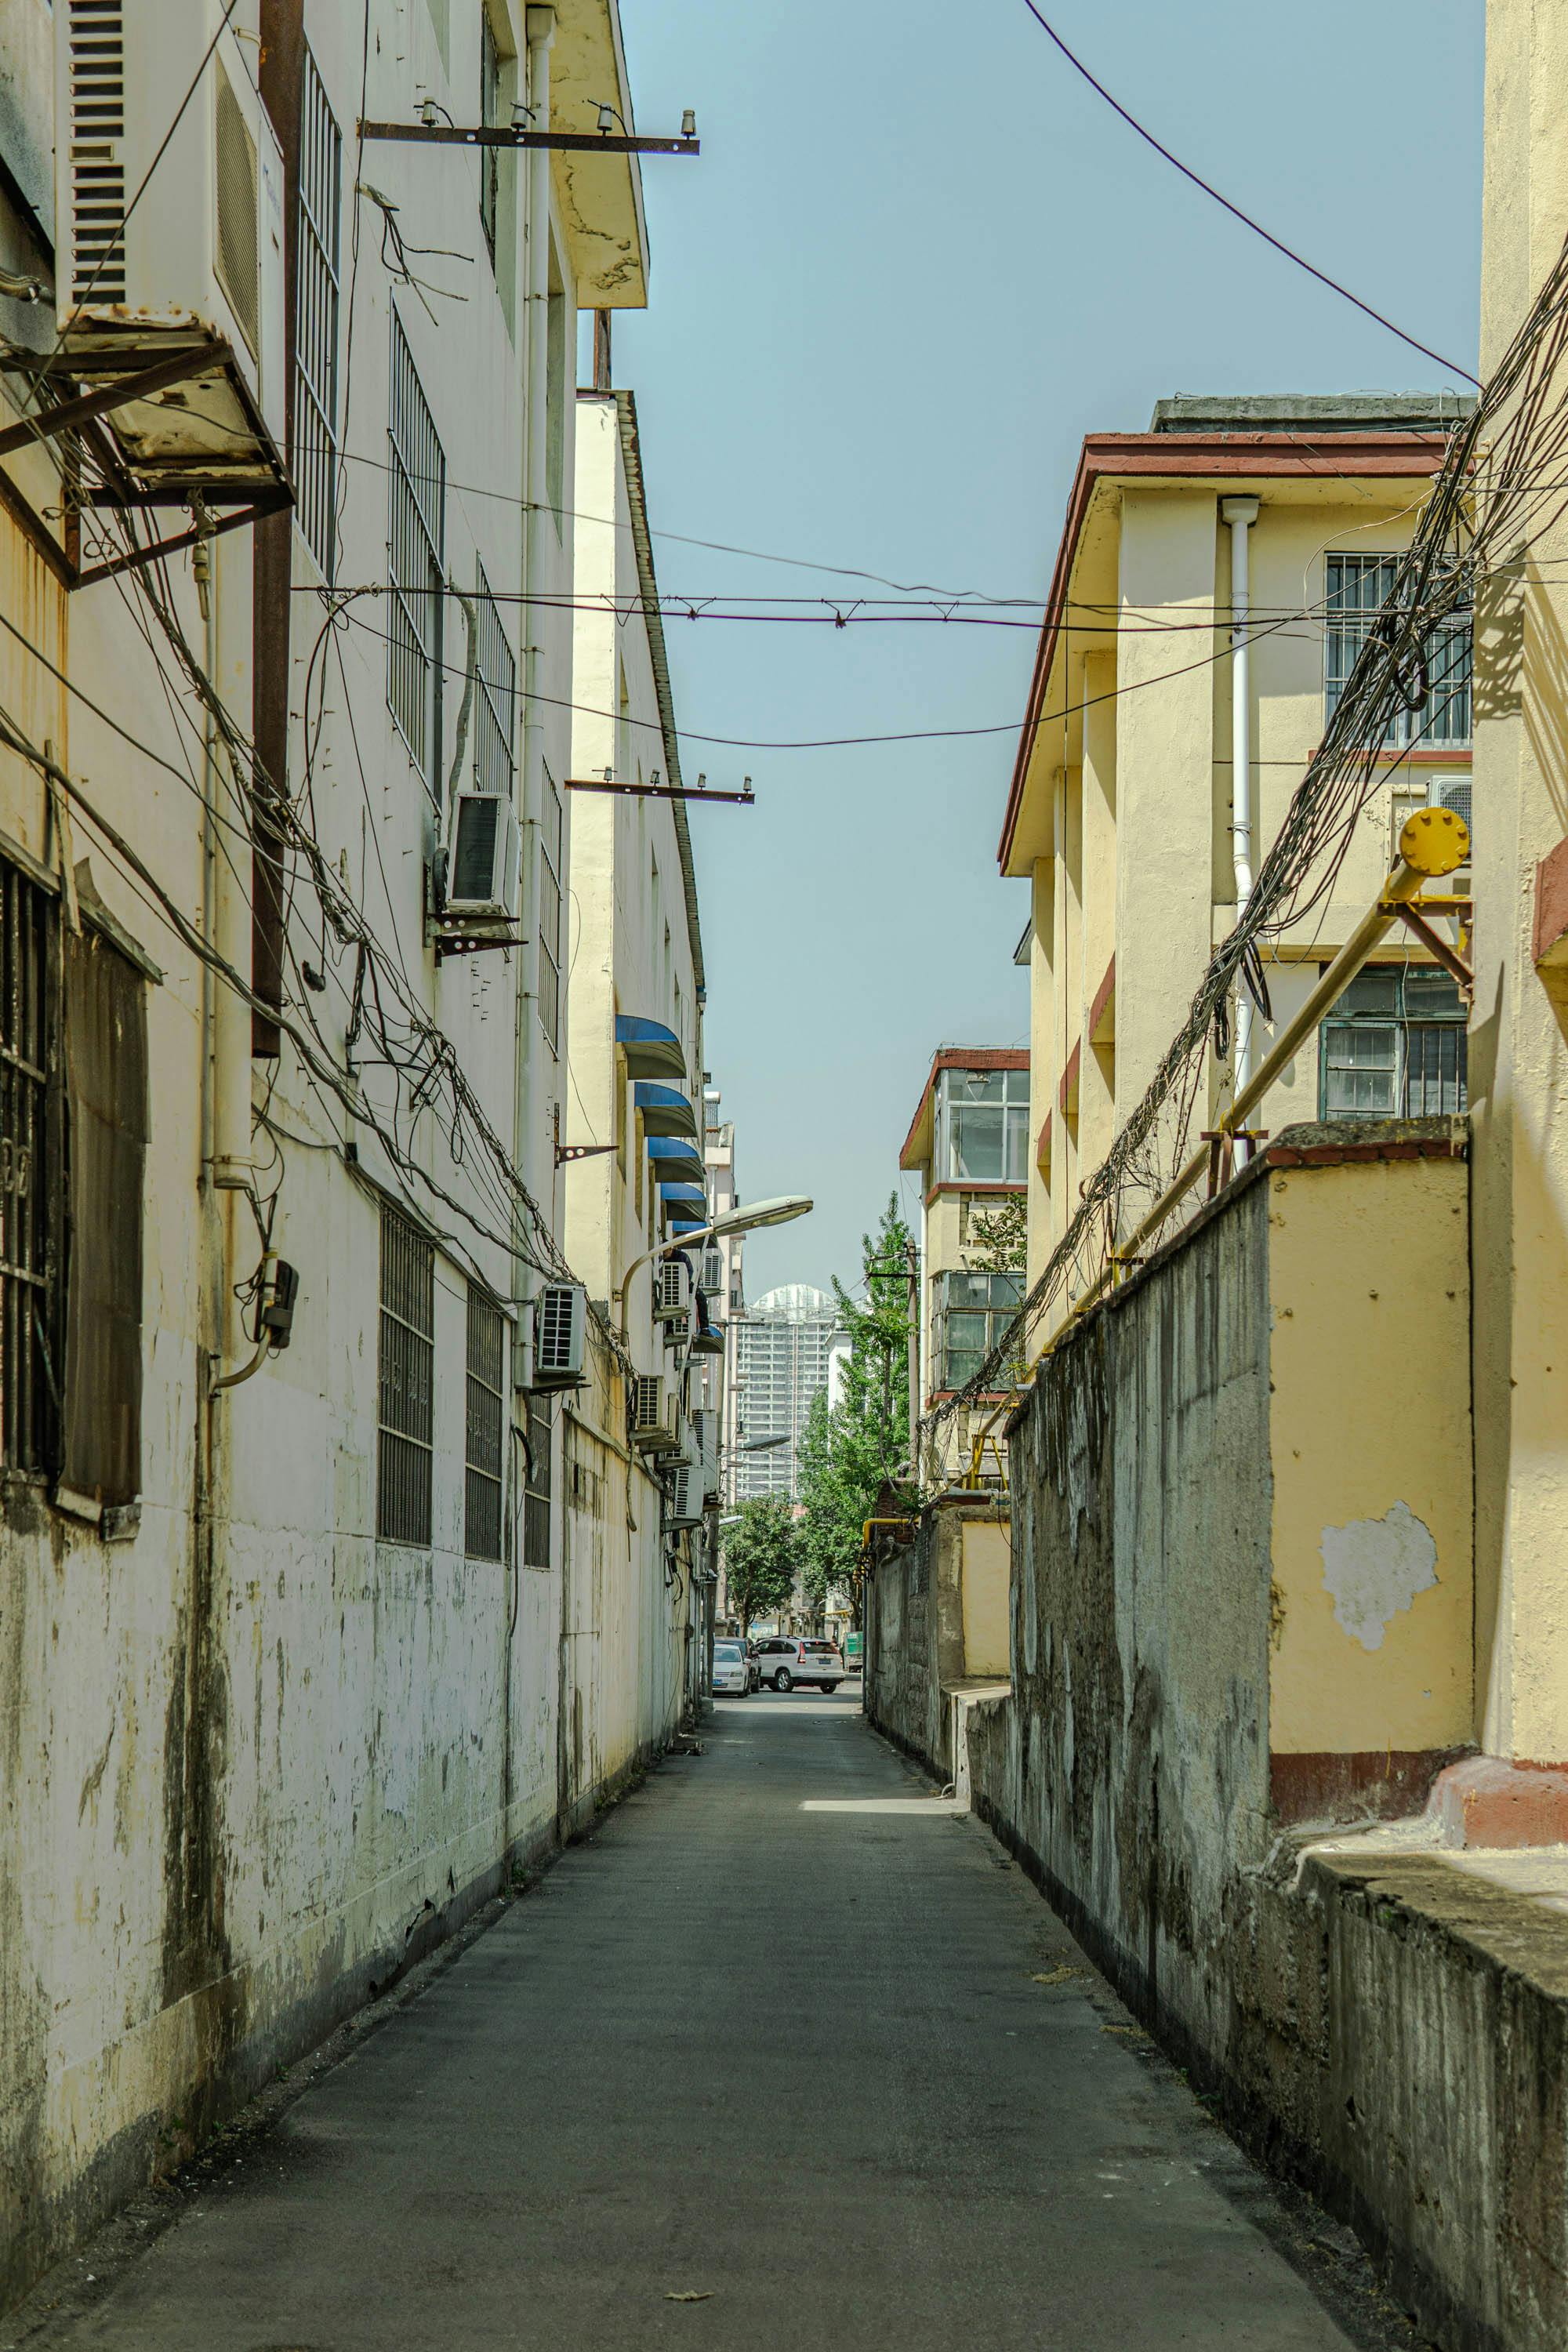 A narrow street with buildings and power lines